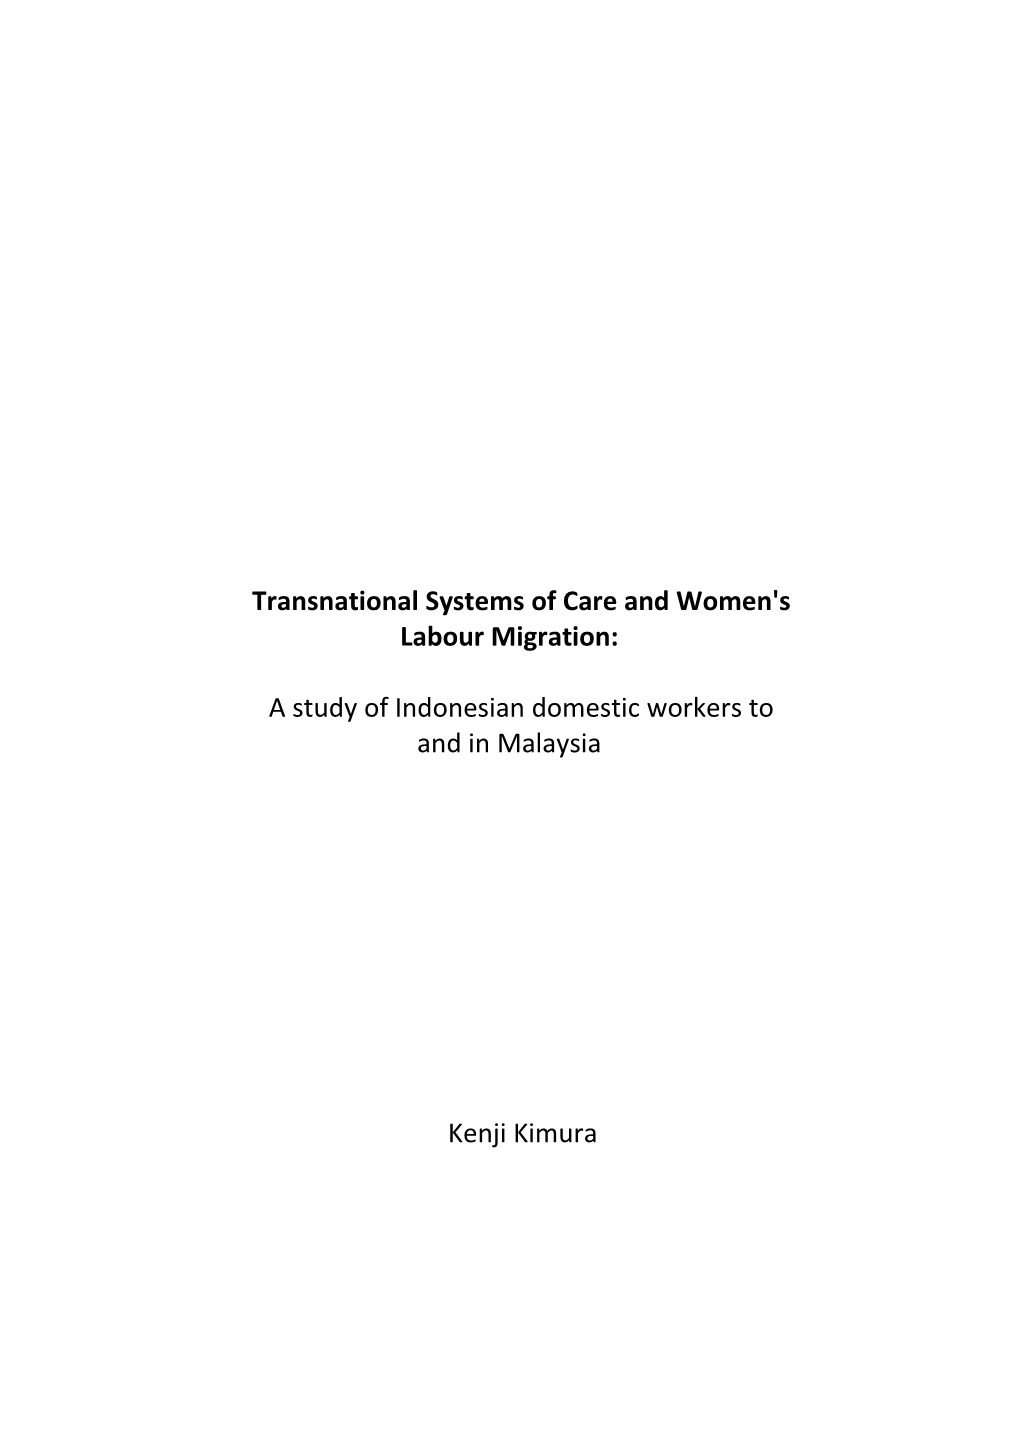 Transnational Systems of Care and Women's Labour Migration